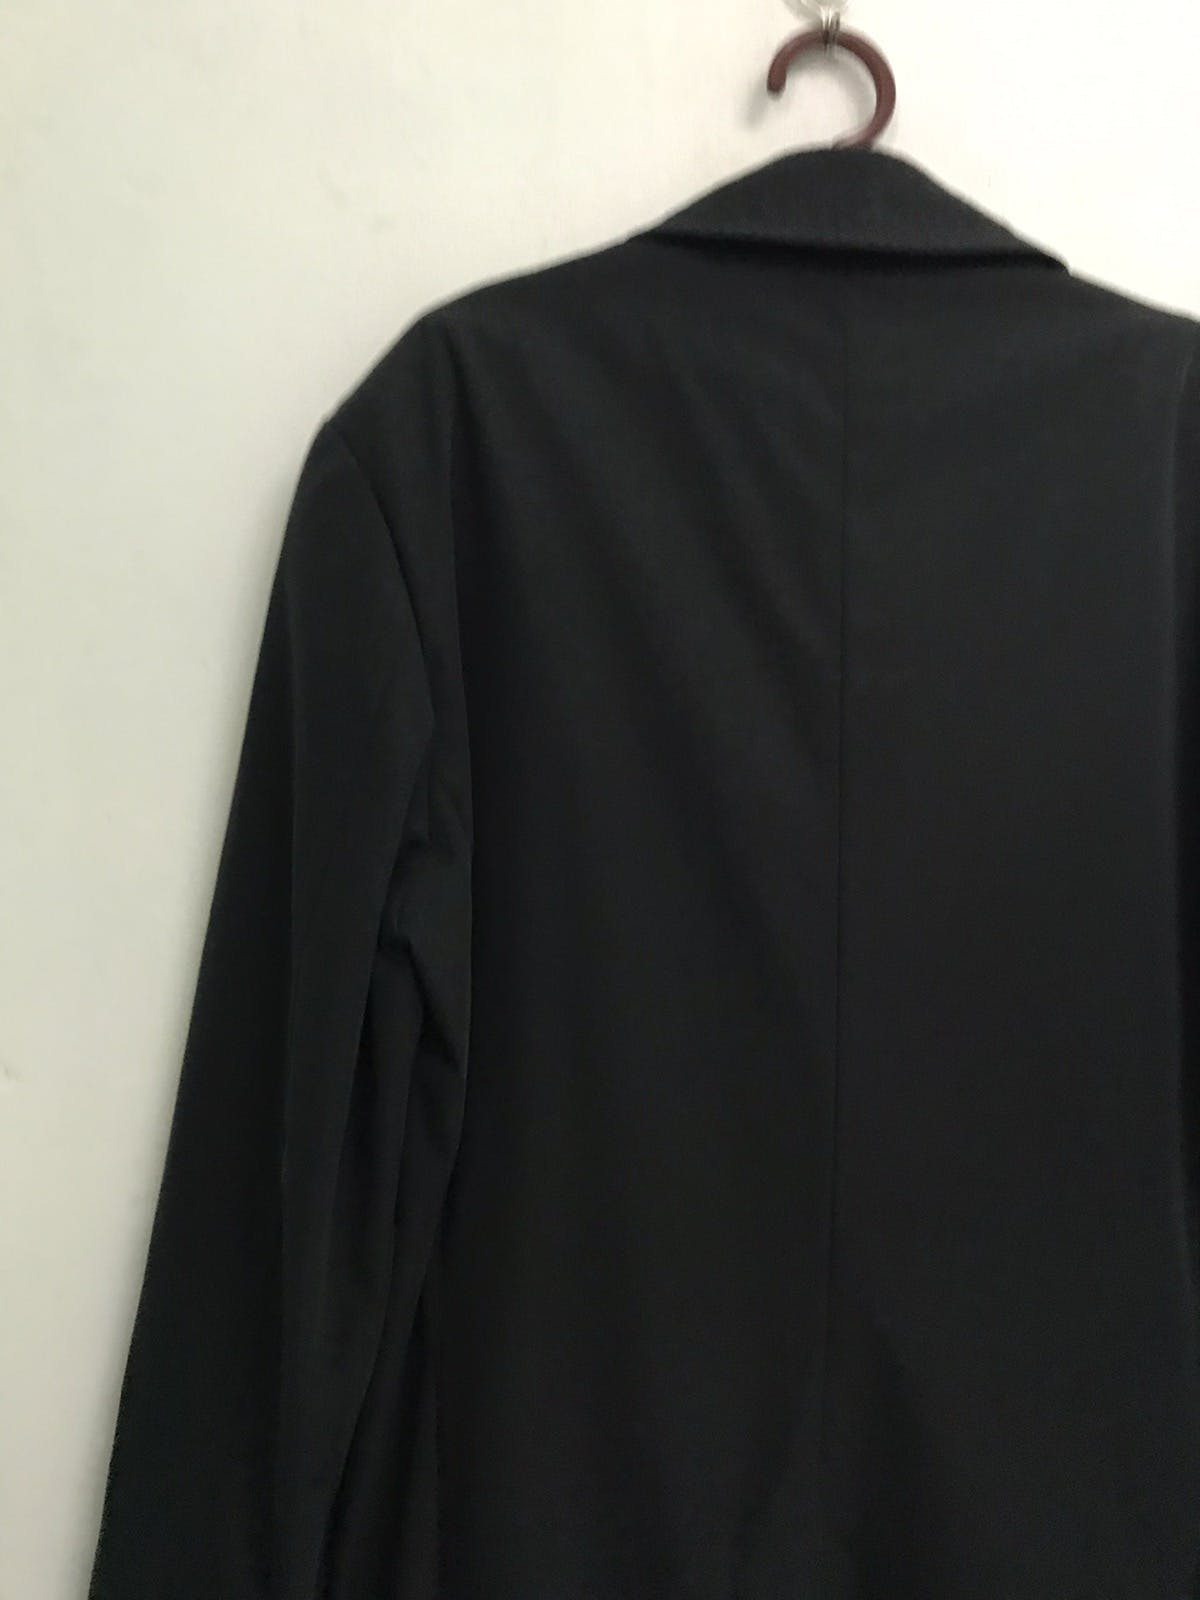 Gucci Long Coat/Jacket Made in Italy - 9